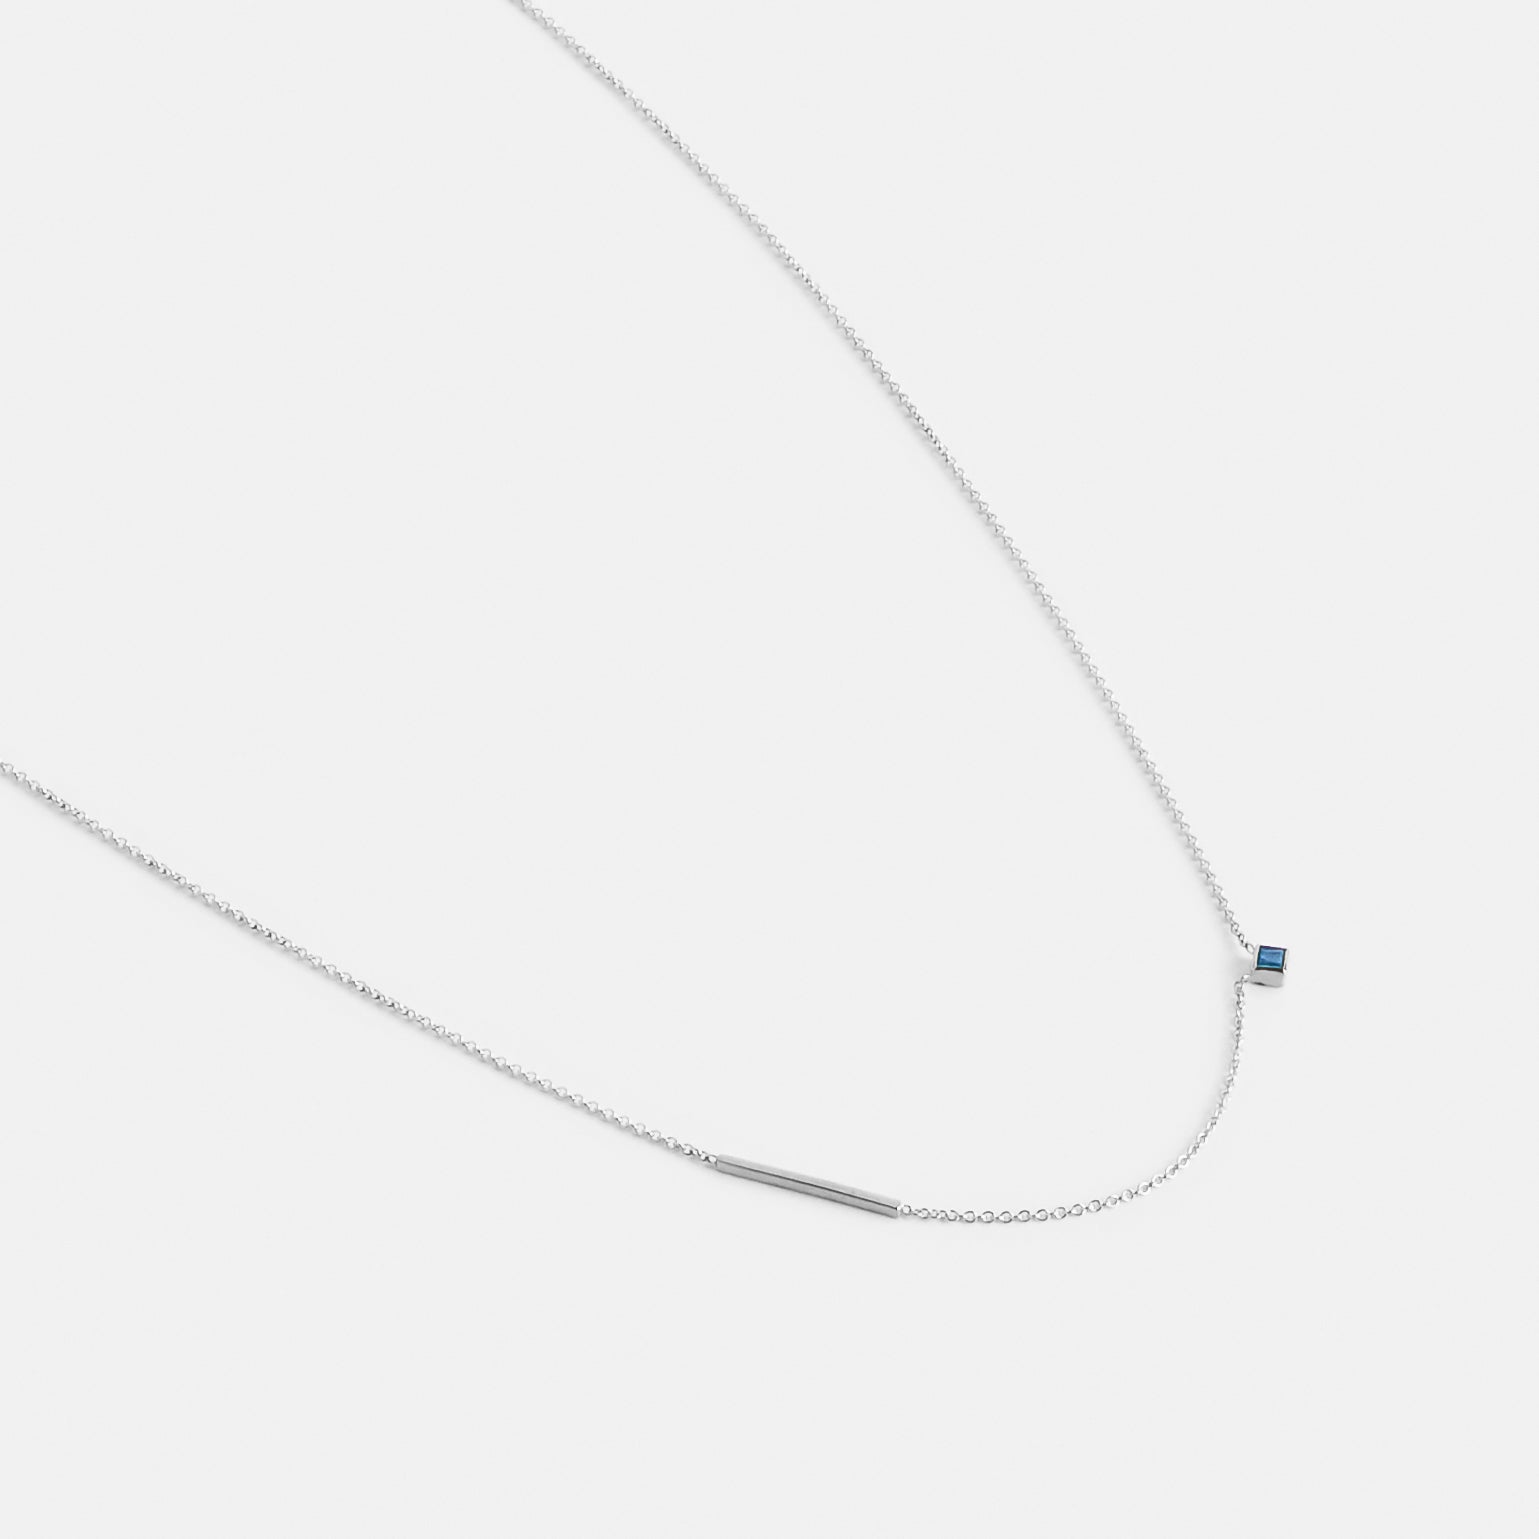 Inu Minimalist Necklace in 14k White Gold Set with Sapphire By SHW Fine Jewelry NYC